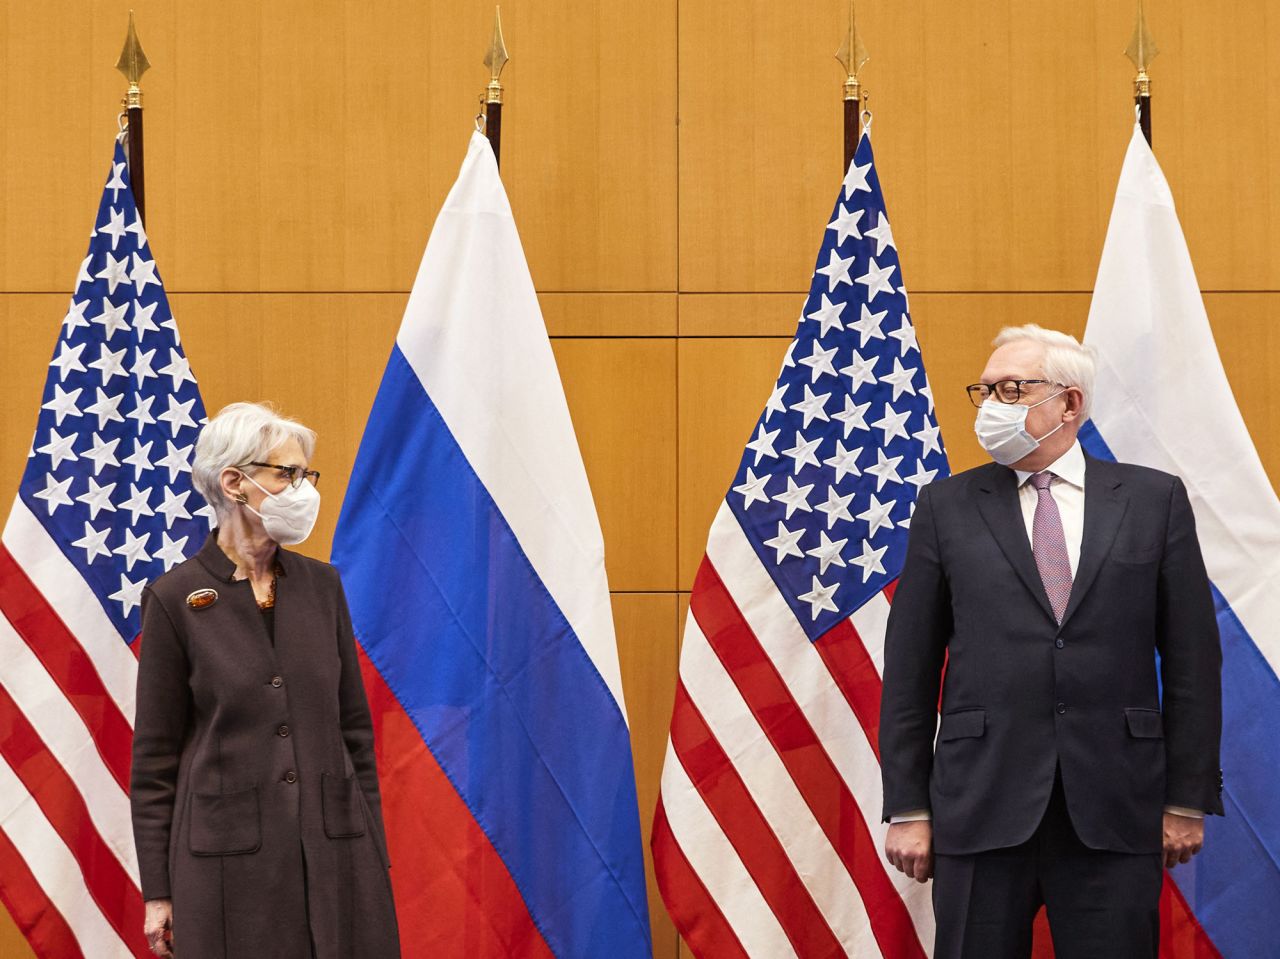 US Deputy Secretary of State Wendy Sherman and Russian Deputy Foreign Minister Sergei Ryabkov pose for pictures as they attend <a href="https://www.cnn.com/2022/01/10/politics/us-russia-ukraine-meetings-geneva-intl/index.html" target="_blank">bilateral talks</a> in Geneva, Switzerland, on Monday, January 10. The talks follow months of tension near the <a href="http://www.cnn.com/2021/12/09/world/gallery/russia-ukraine-border-tension/index.html" target="_blank">Ukraine-Russia border,</a> where more than 100,000 Russian soldiers have massed. Ryabkov told reporters after the meeting that despite American concerns about the Russian troop buildup along the Ukrainian border, Moscow had no intention of launching military action. Sherman told reporters it is too soon to say whether the Kremlin was serious about diplomacy.